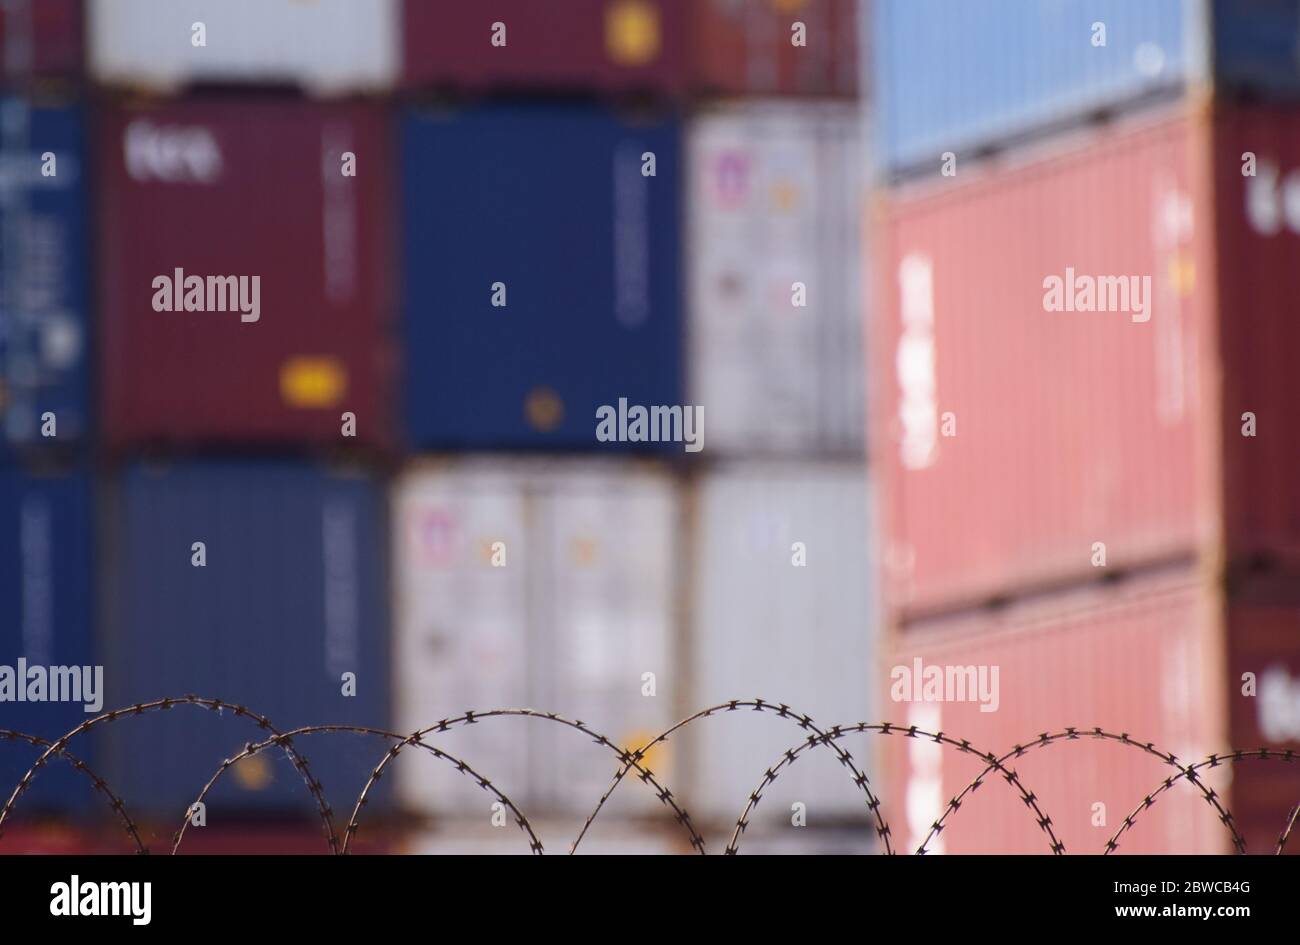 Freight shipping containers stacked up behind barbed wire at a busy European sea port Stock Photo